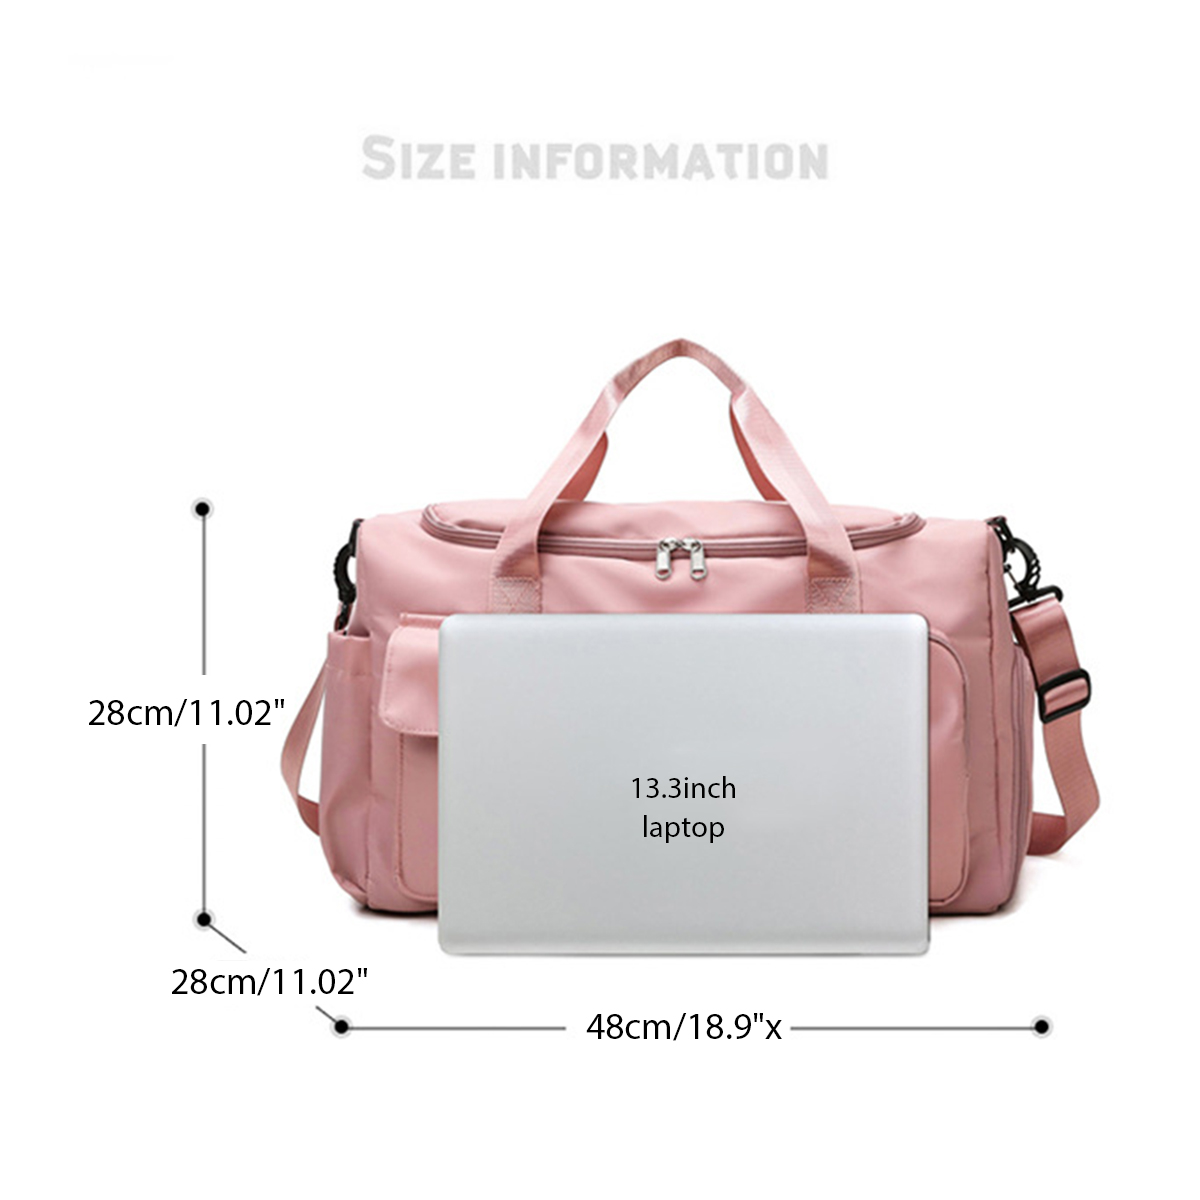 20-Waterproof-Outdoor-Travel-Bag-Large-Capacity-with-Shoes-Compartment-Storage-Bag-Short-Tour-Weeken-1854807-9